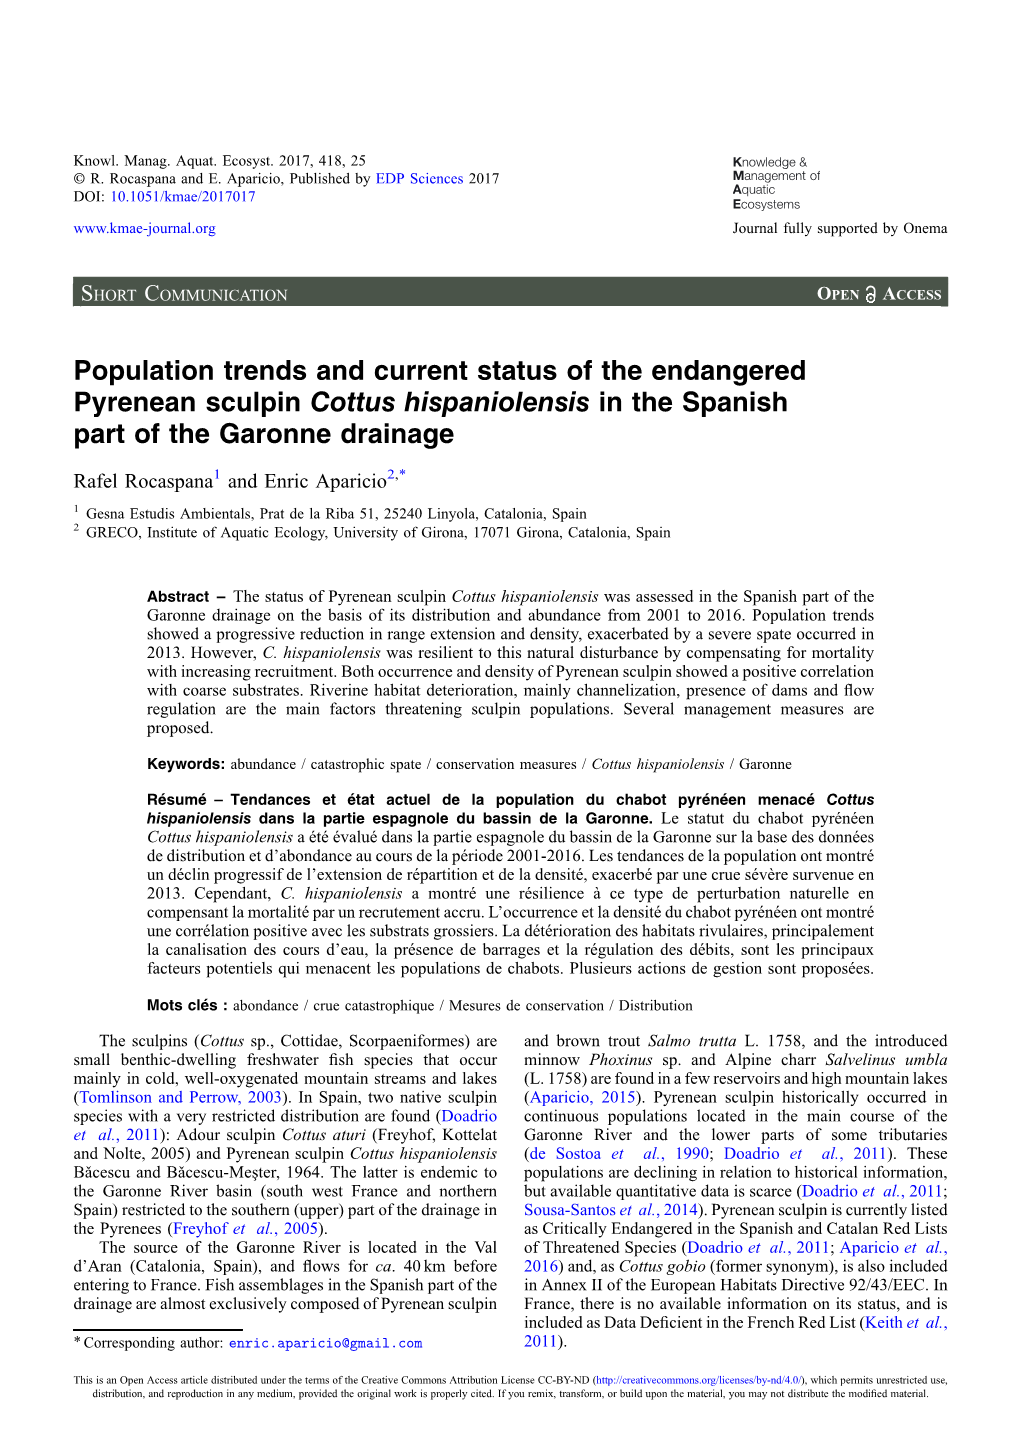 Population Trends and Current Status of the Endangered Pyrenean Sculpin Cottus Hispaniolensis in the Spanish Part of the Garonne Drainage